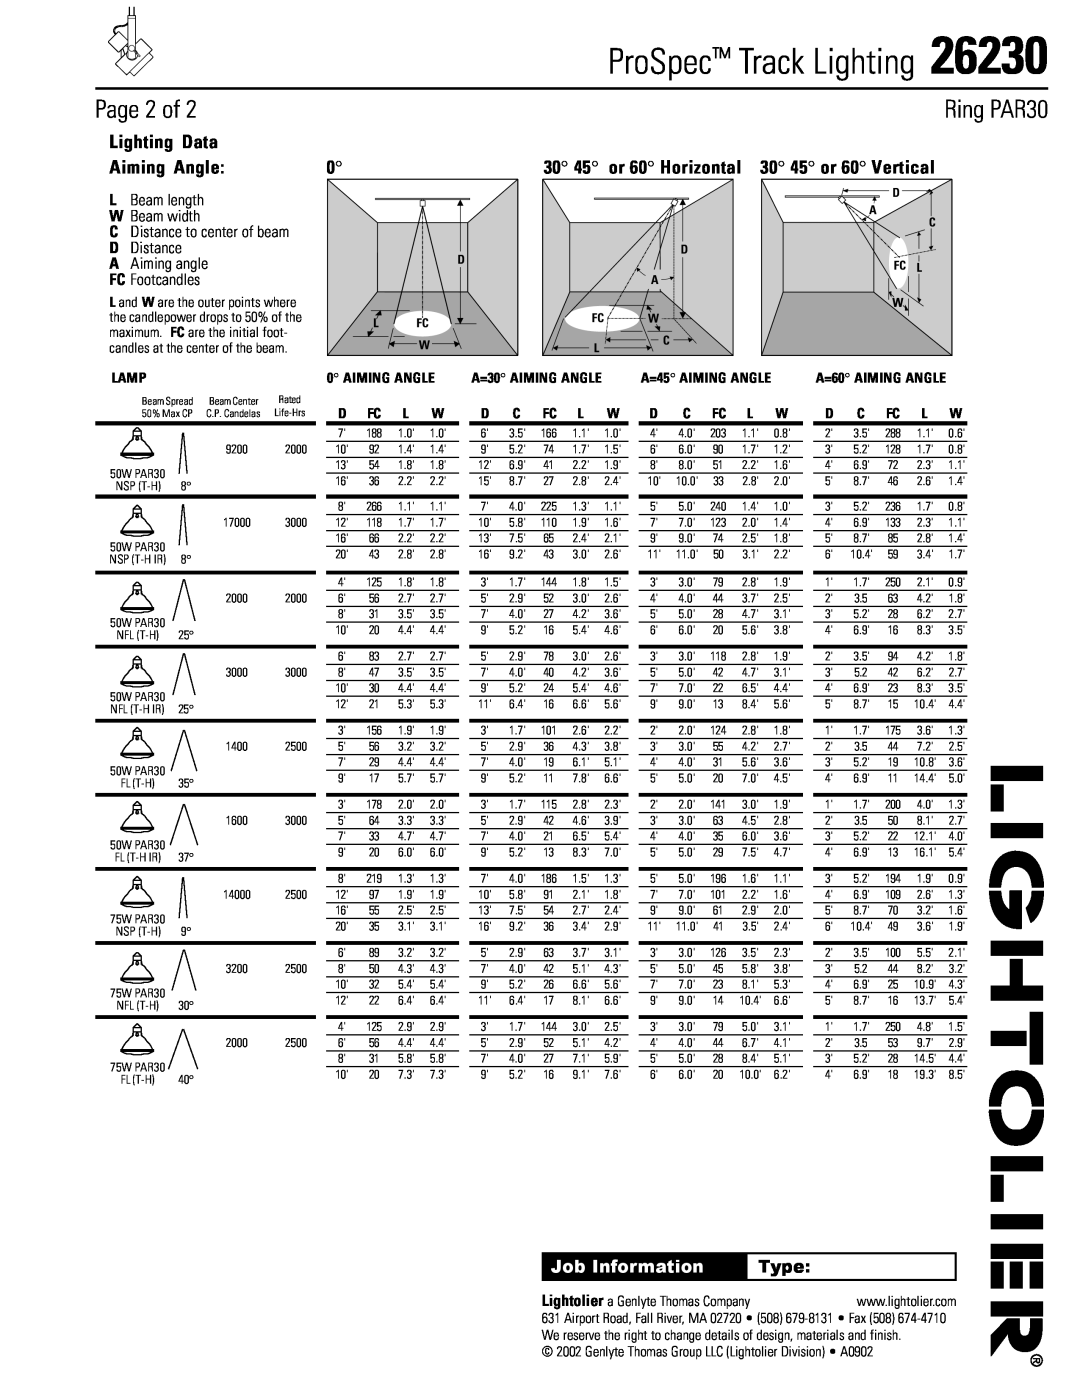 Lightolier 26230 Page 2 of, Lighting Data, Aiming Angle, 30 45 or 60 Horizontal 30 45 or 60 Vertical, Lamp, D Fc L W, Type 